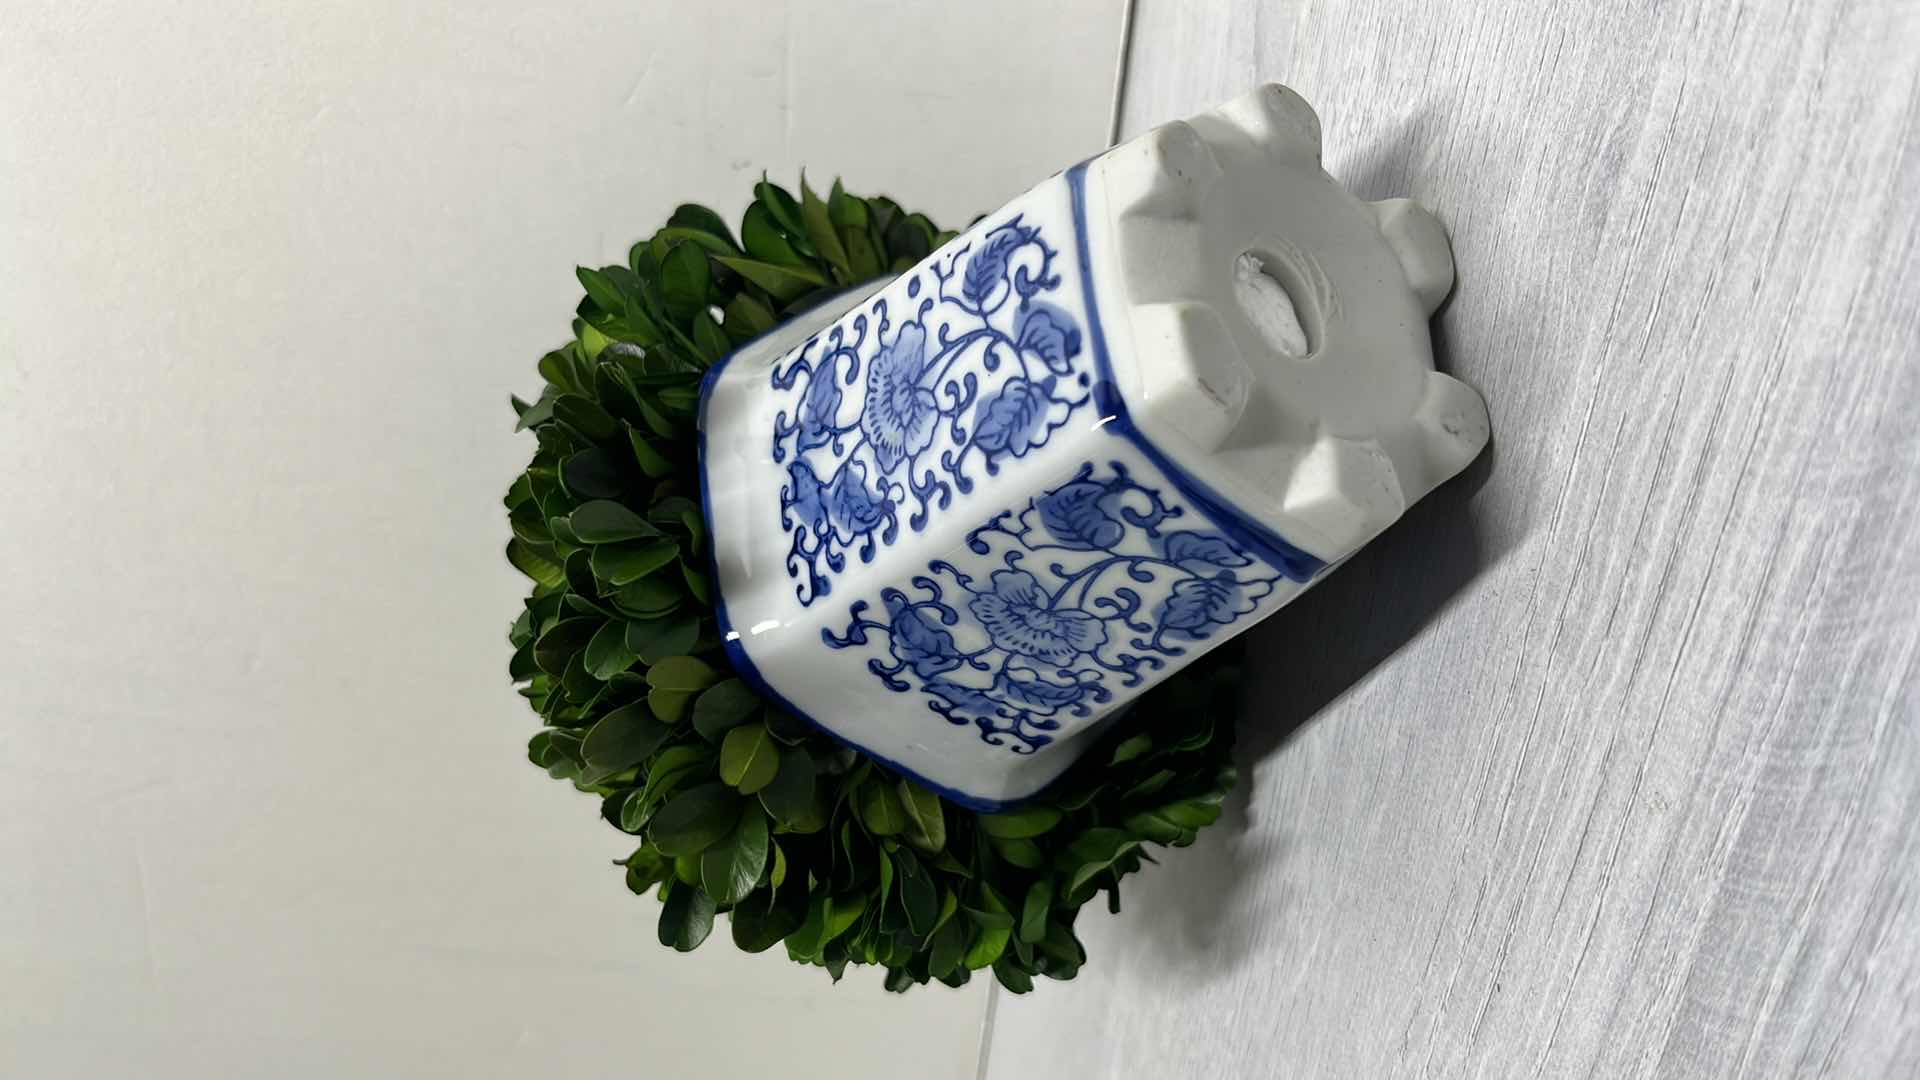 Photo 3 of NATURALLY PRESERVED BOXWOOD BALL TOPIARY IN FLORAL BLUE/WHITE CERAMIC POT 7.5”